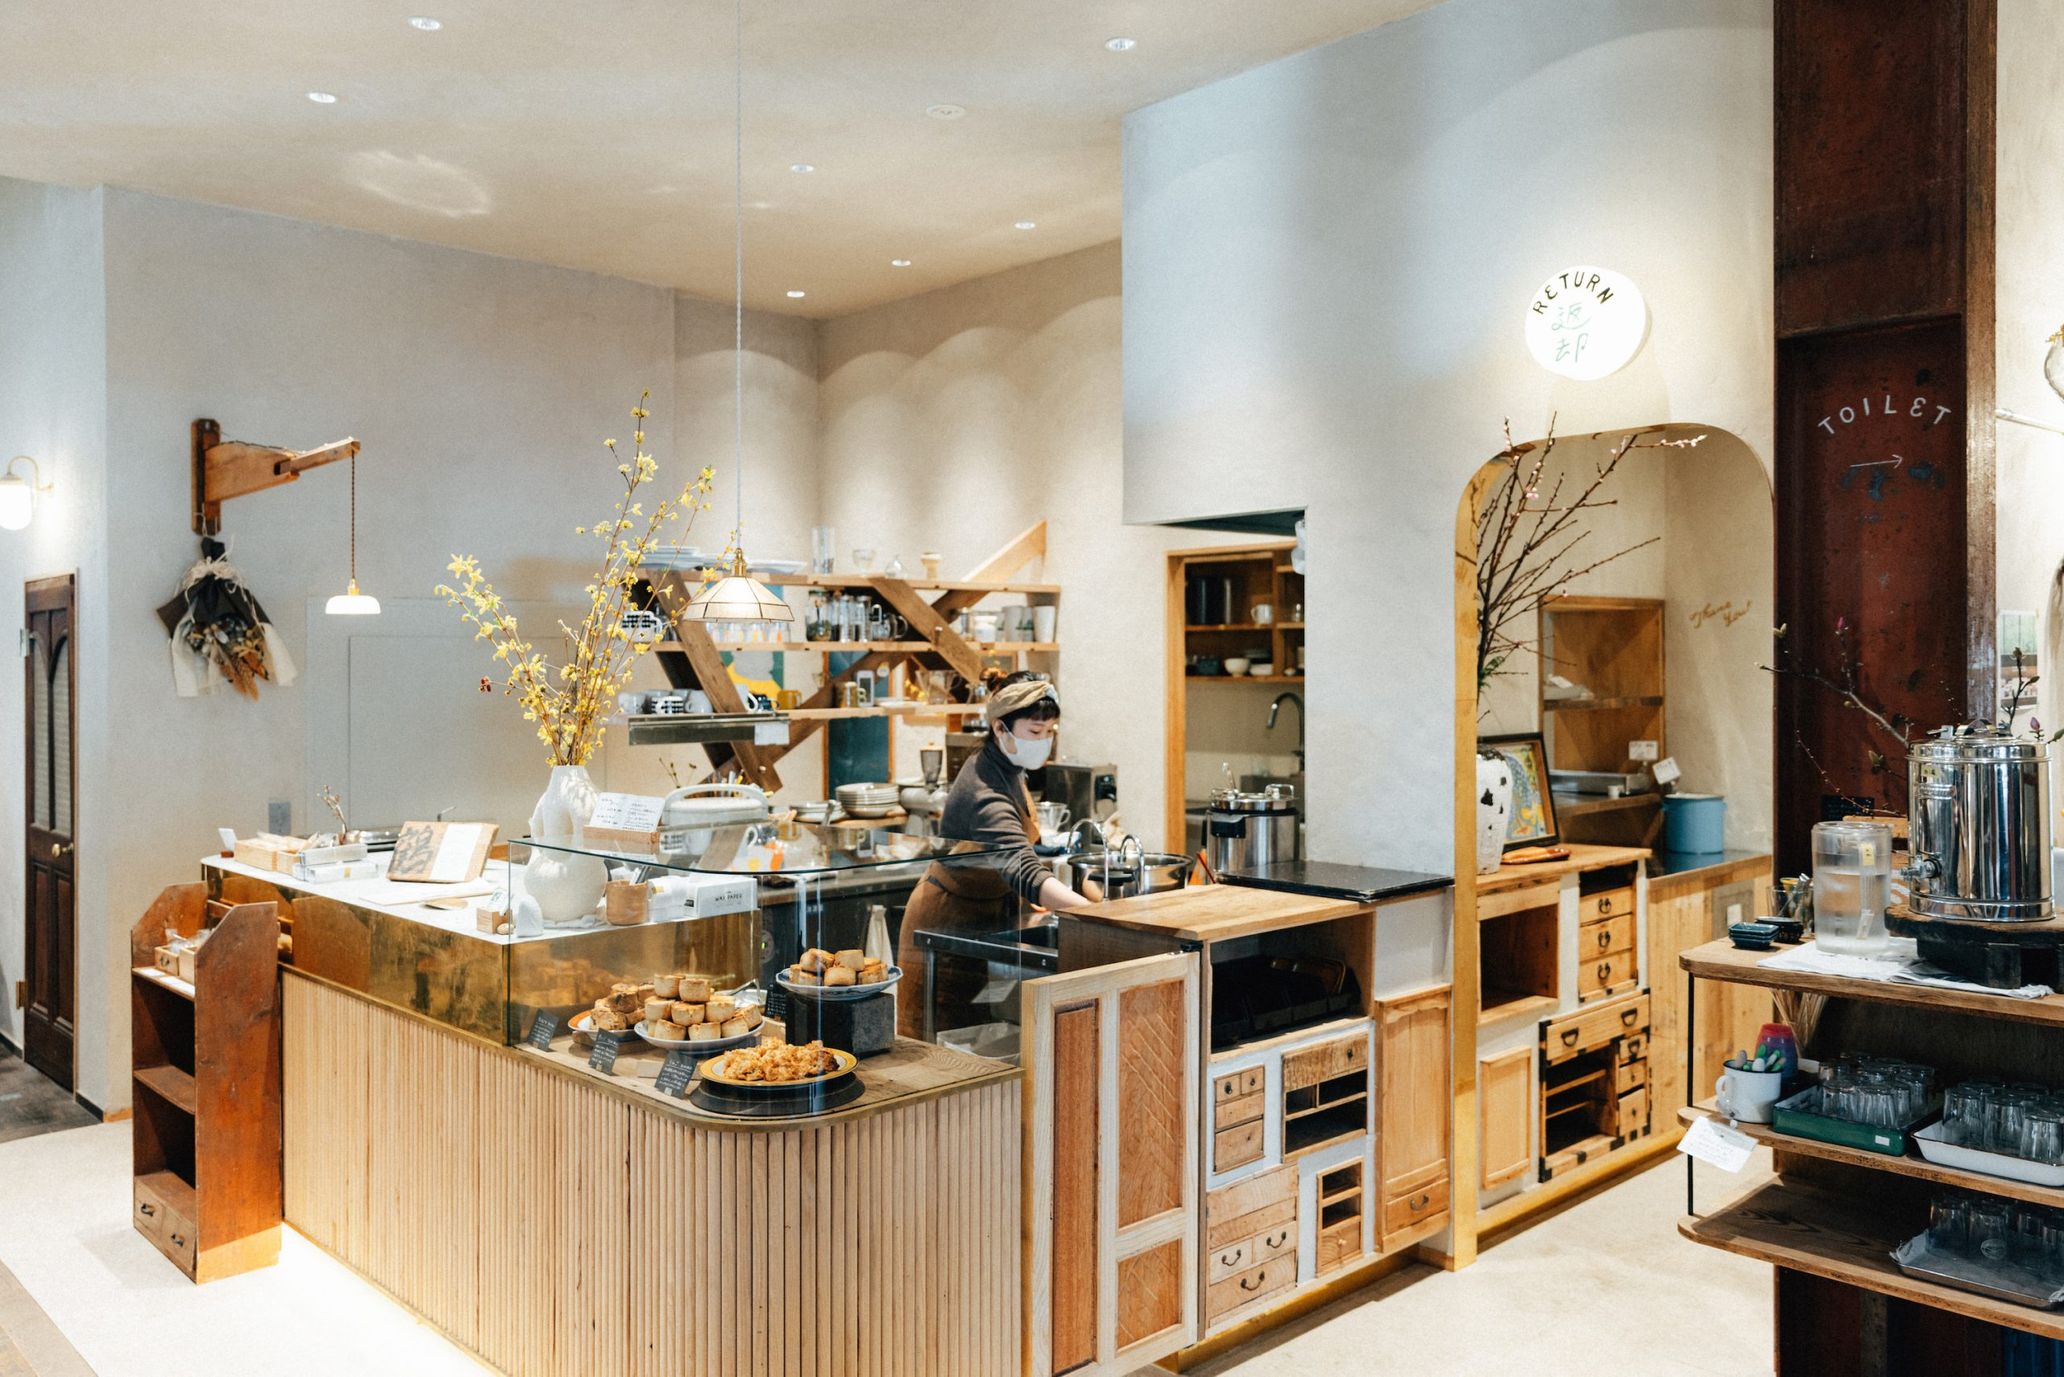 The cafe on the first floor of ReBuiCen is a place for people to meet, but is also utilized as a showroom that demonstrates how to use reclaimed materials